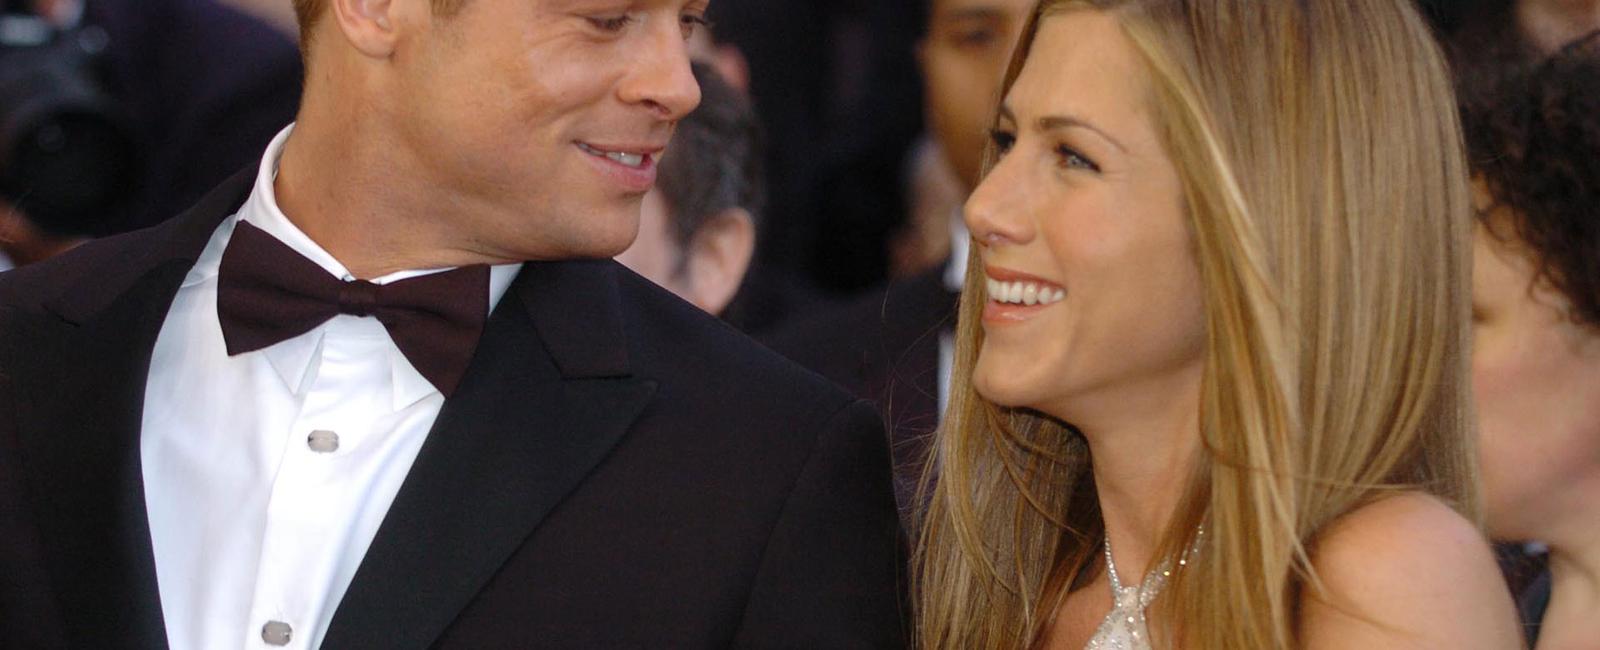 After marrying brad pitt jennifer aniston legally changed her surname to pitt but continued using aniston professionally after their divorce she changed it back